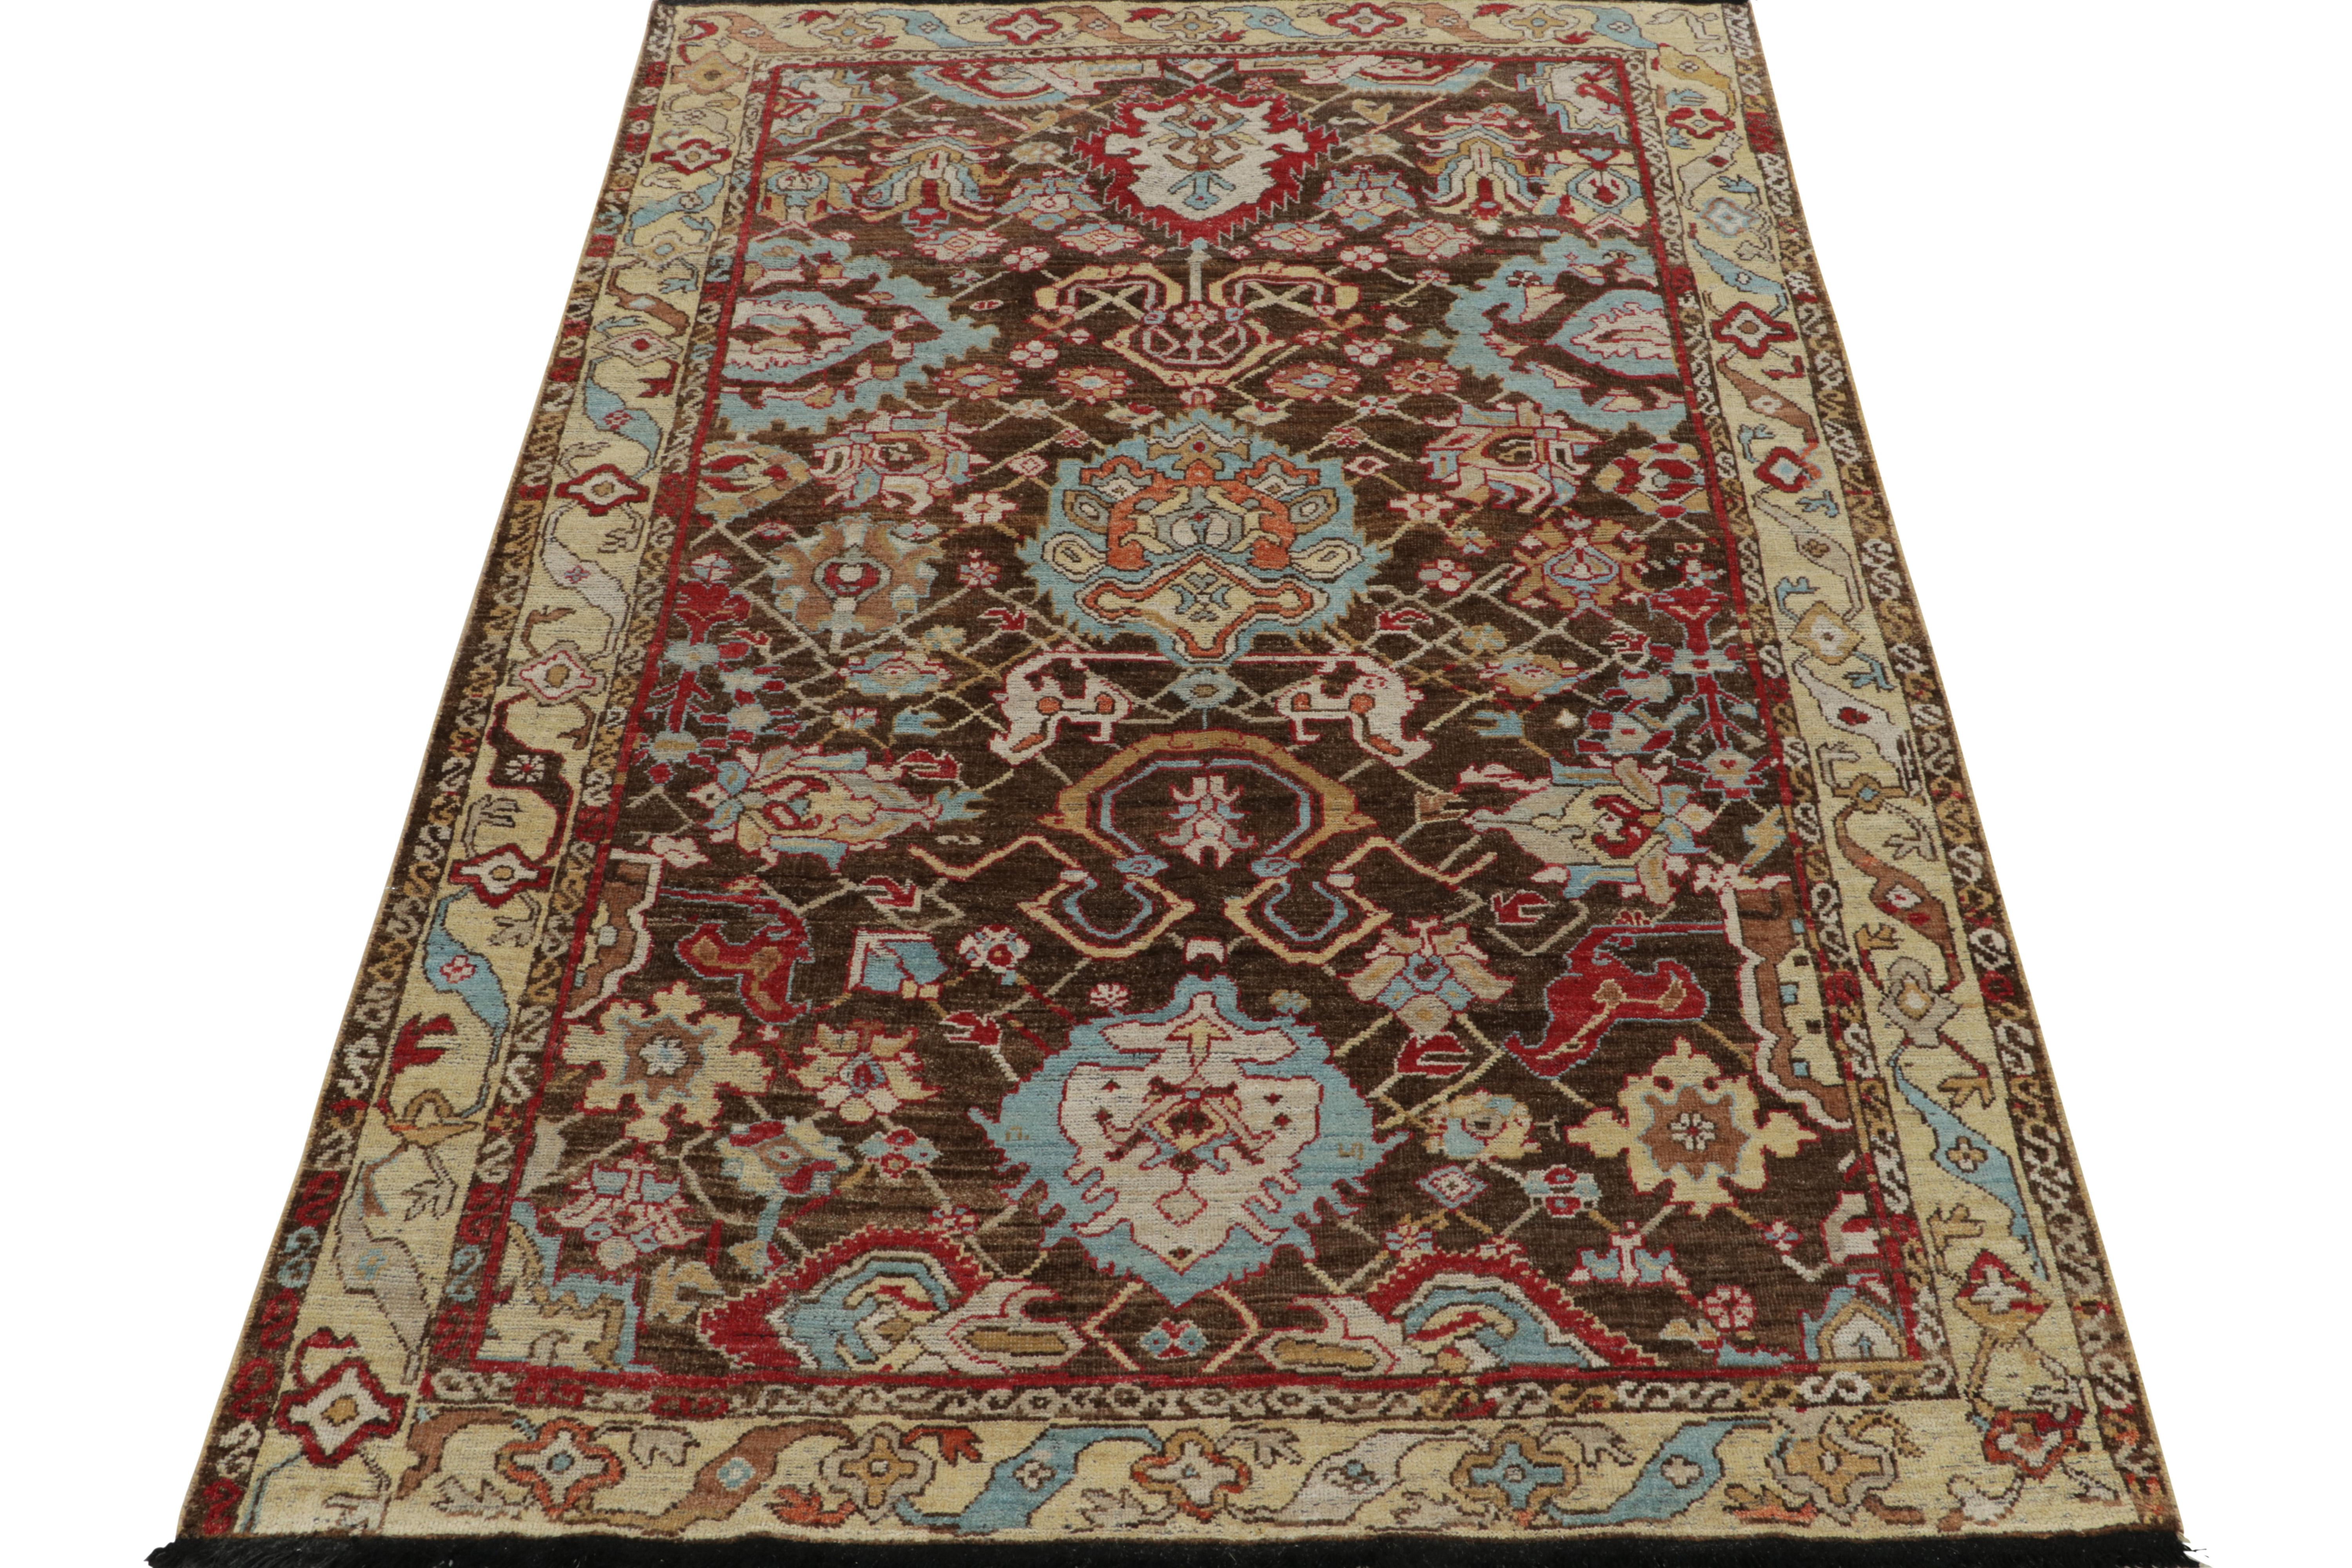 Hand-knotted in wool, a 6x8 ode to classic 18th century Caucasian rug aesthetics—from Rug & Kilim’s extensive Burano Collection. 

The carpet draws on antique palmette designs with a regal appeal. Well-drawn lotus blossom patterns & motifs in red,